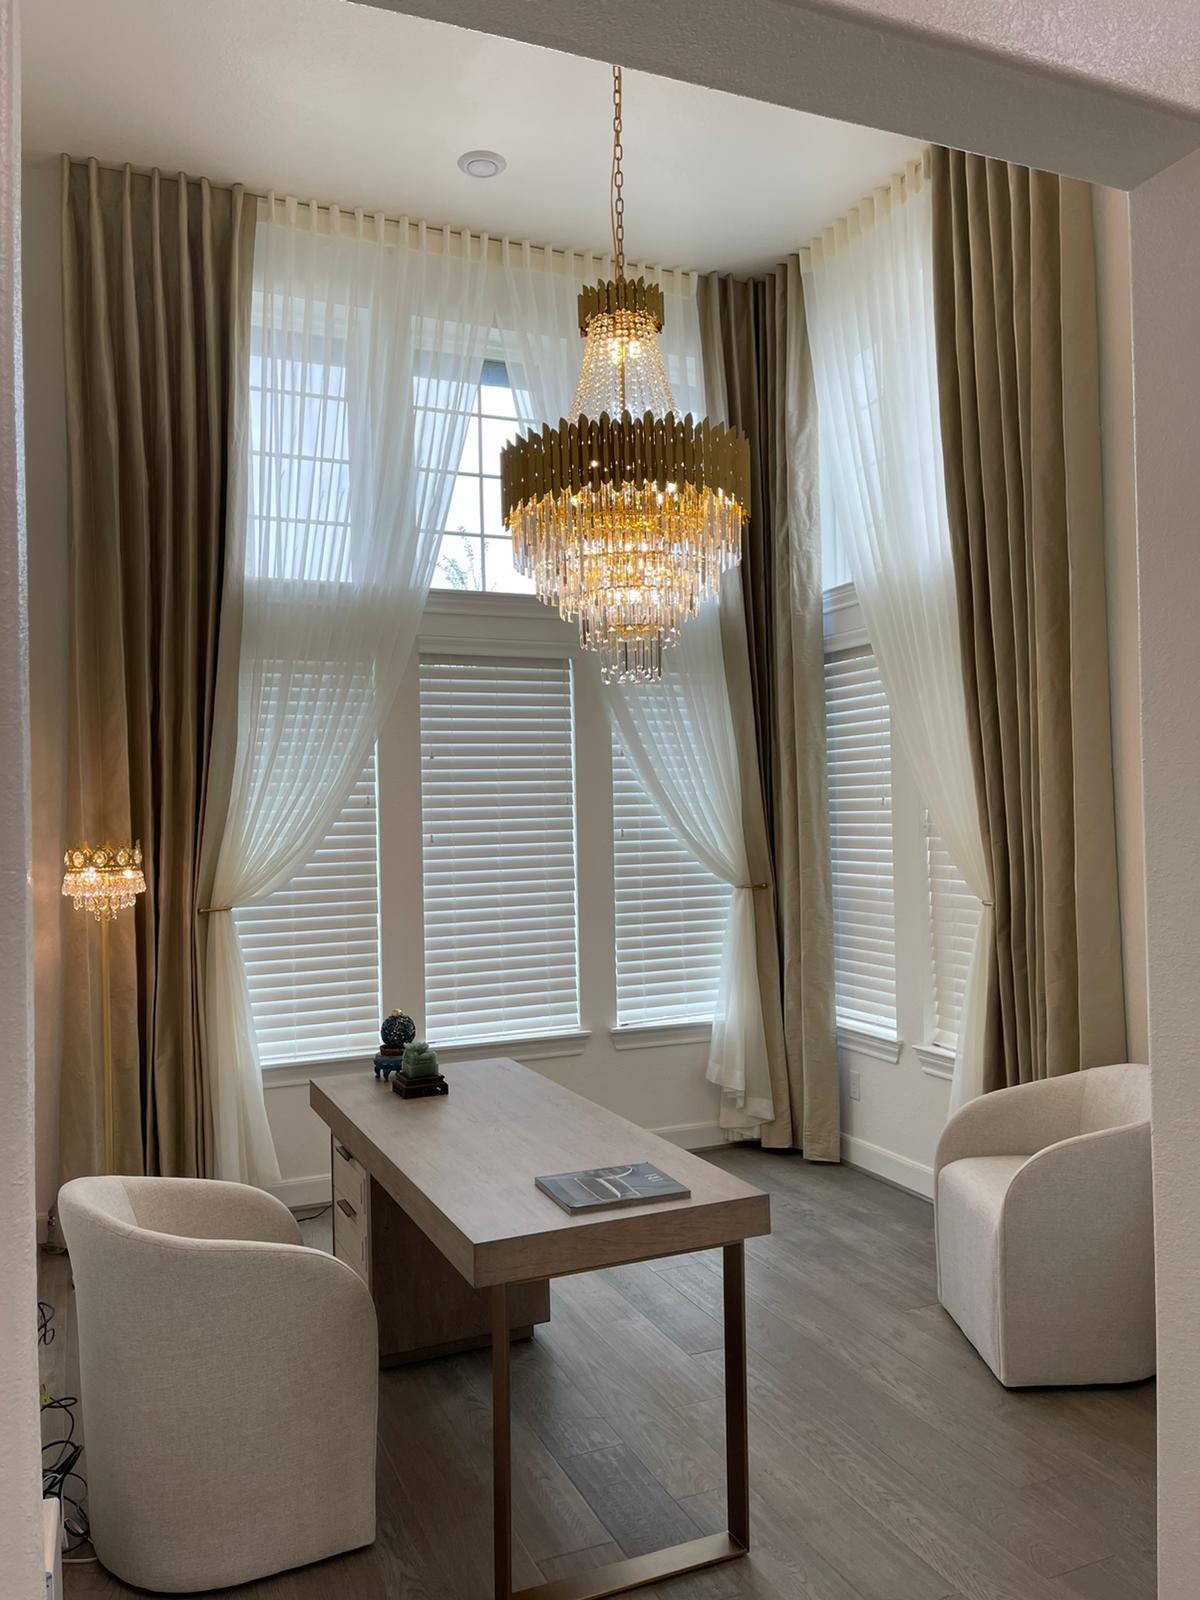 This Sugar Land home is the height of elegance! We wanted to keep the look simple but beautiful. That’s why we went with these gorgeous Draperies and Wood Blinds!